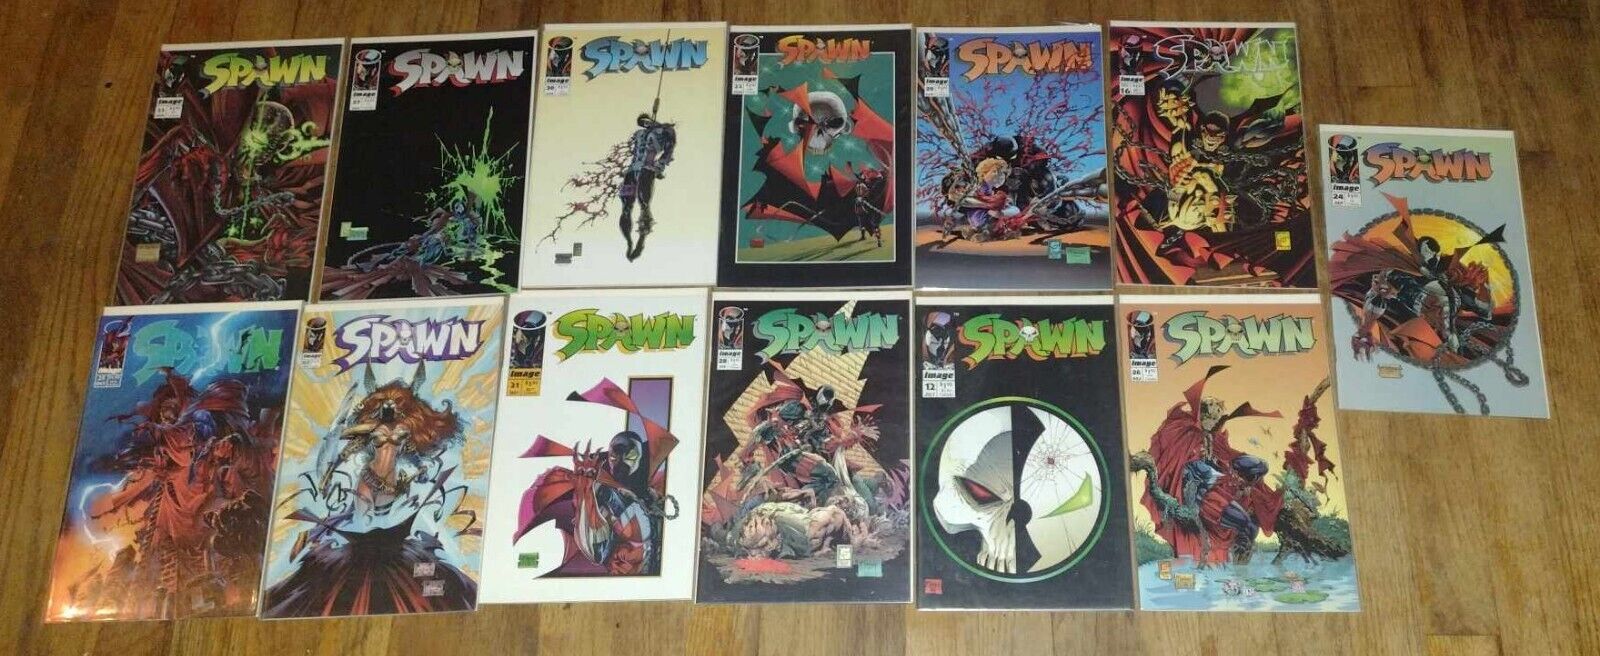 Spawn lot of 13 comics Todd McFarlane Image Early issues